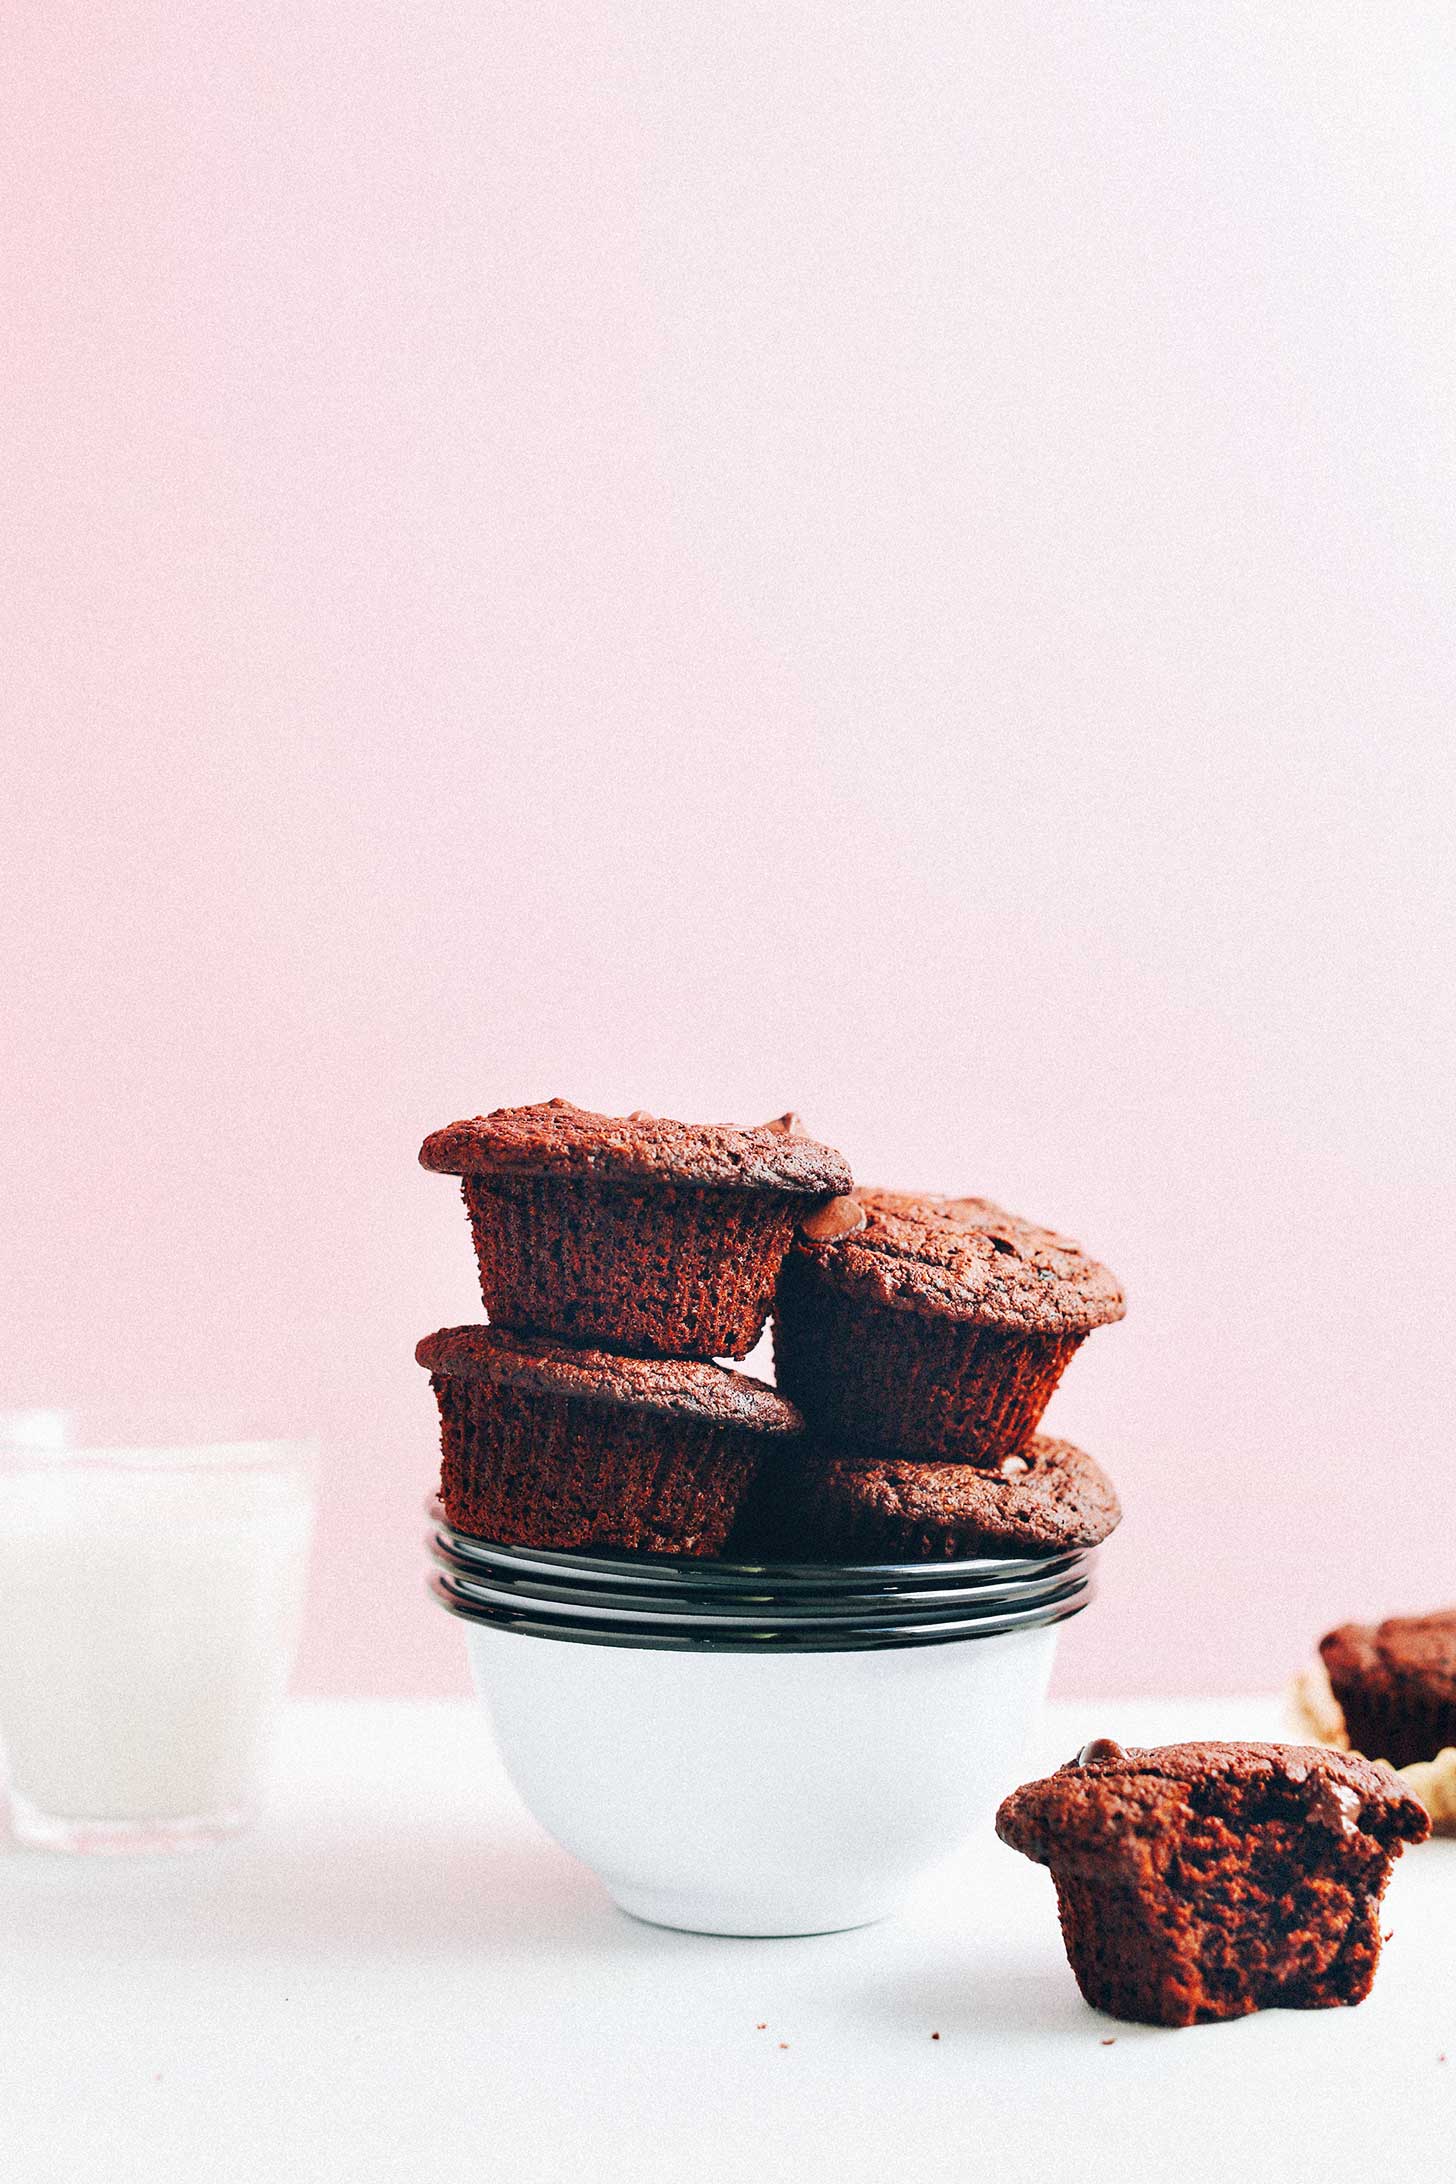 Stack of gluten-free Chocolate Muffins for a healthy vegan snack